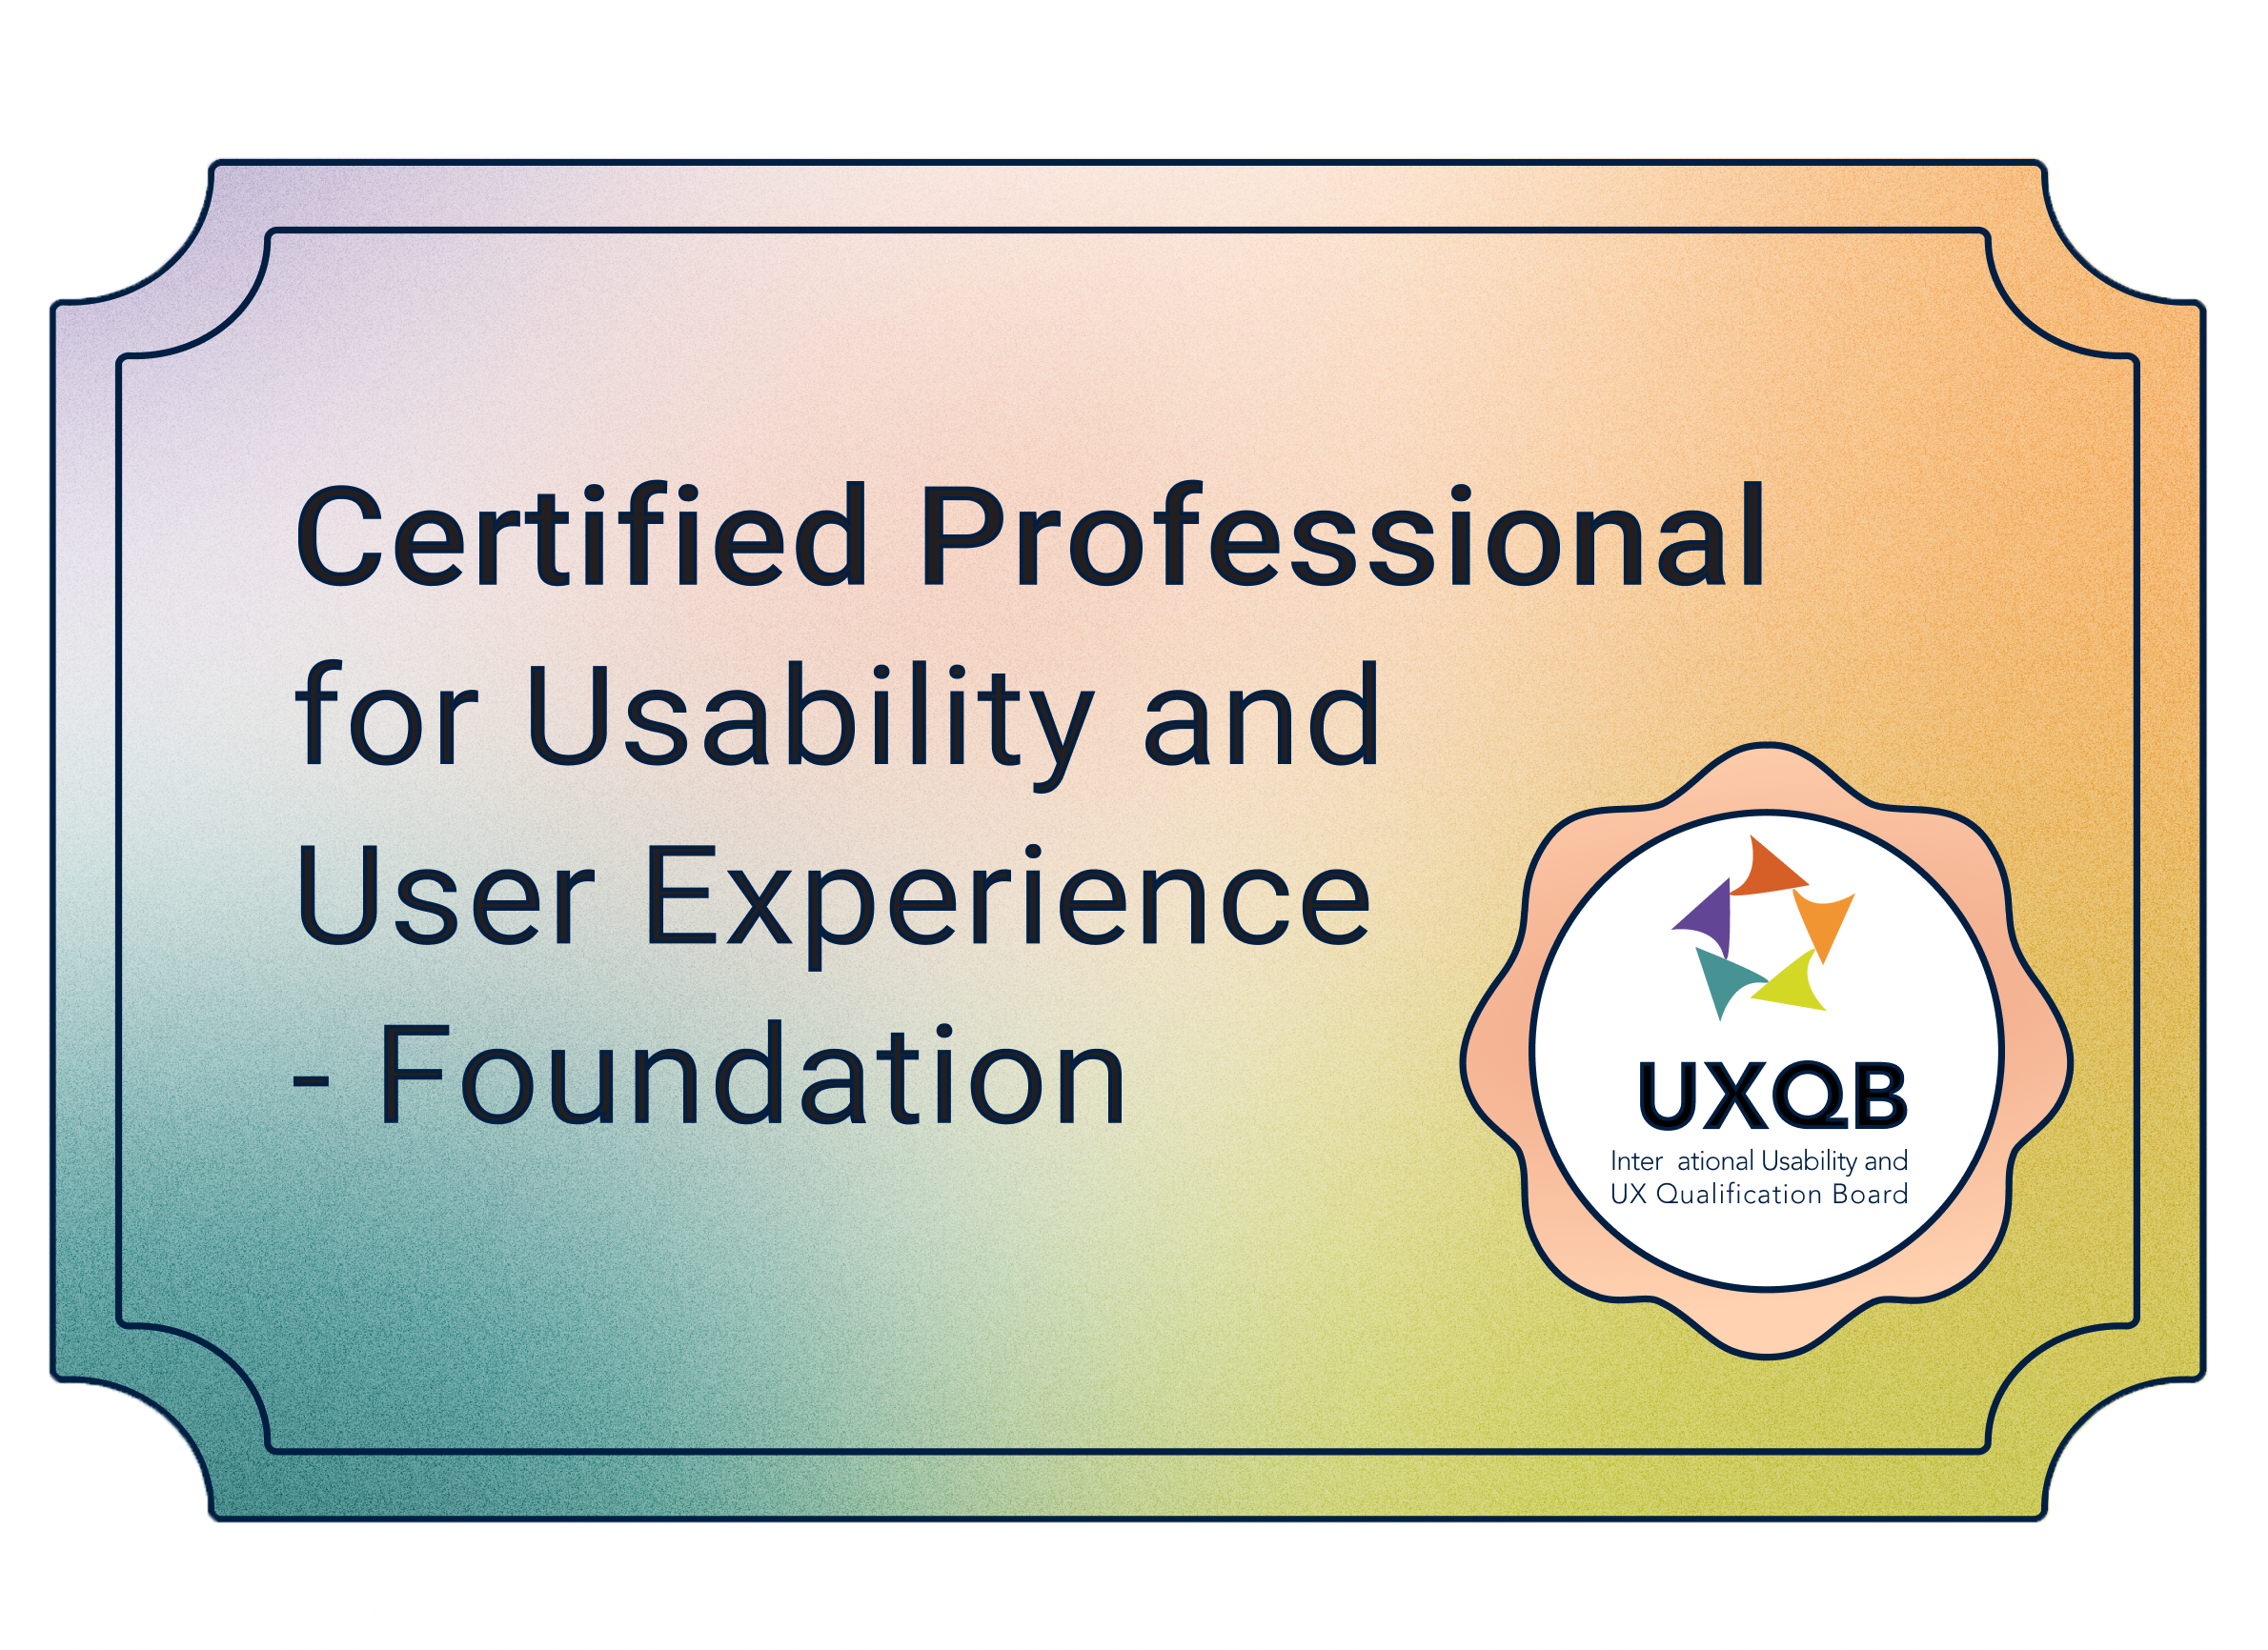 UXQB® Certified Professional for Usability and User Experience - Foundation Level